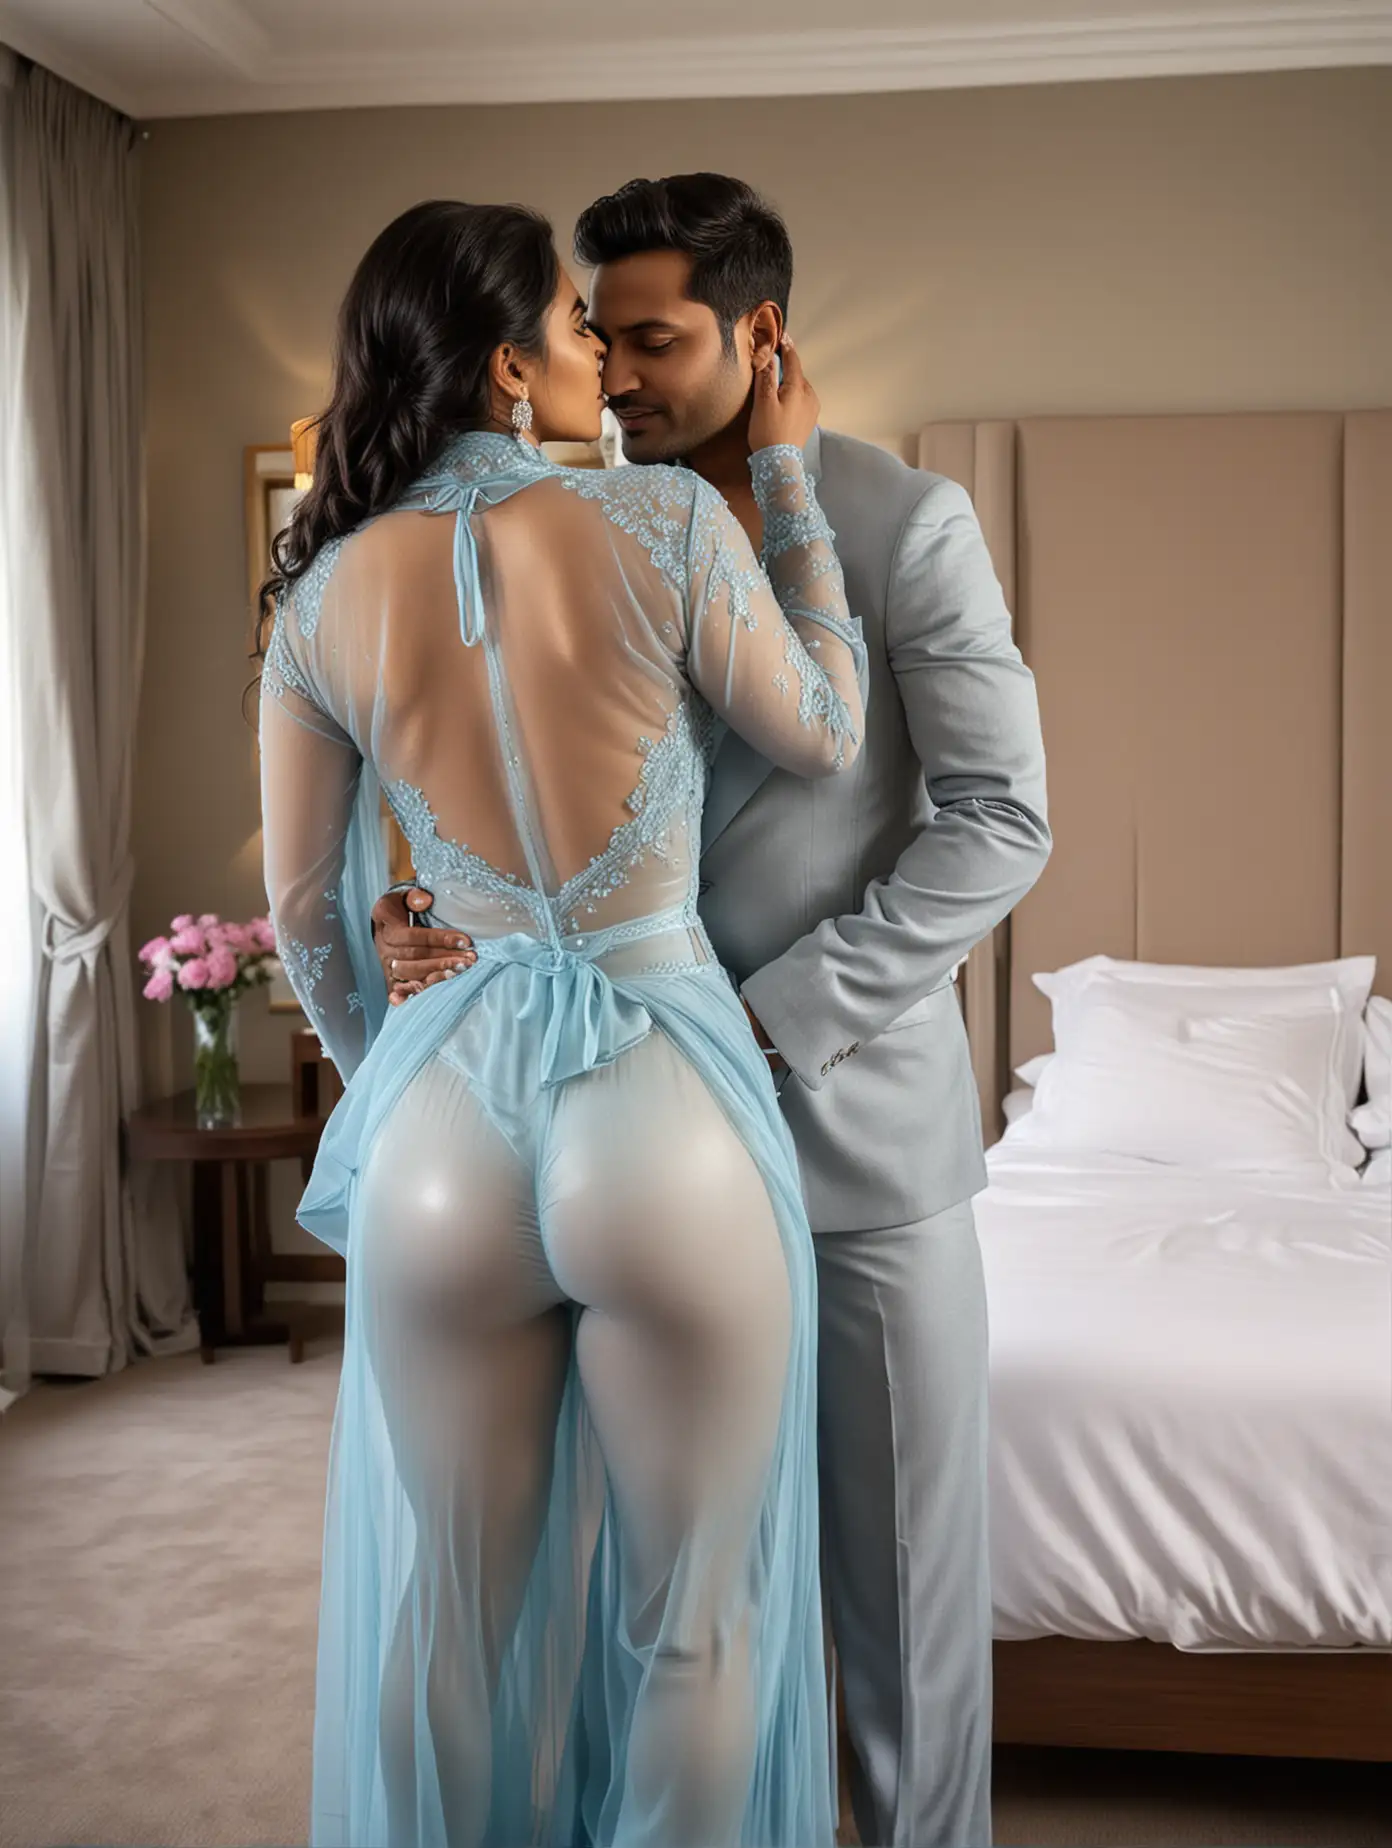 Generate full  body back view image of a 45 year old very busty and curvy Indian woman  wearing skin tight very shining sky blue see through full transparent chiffon full sleeve and  full pant  bodysuit  standing with  her boyfriend wearing formal grey suit in a heritage hotel bedroom and hugging her from behind